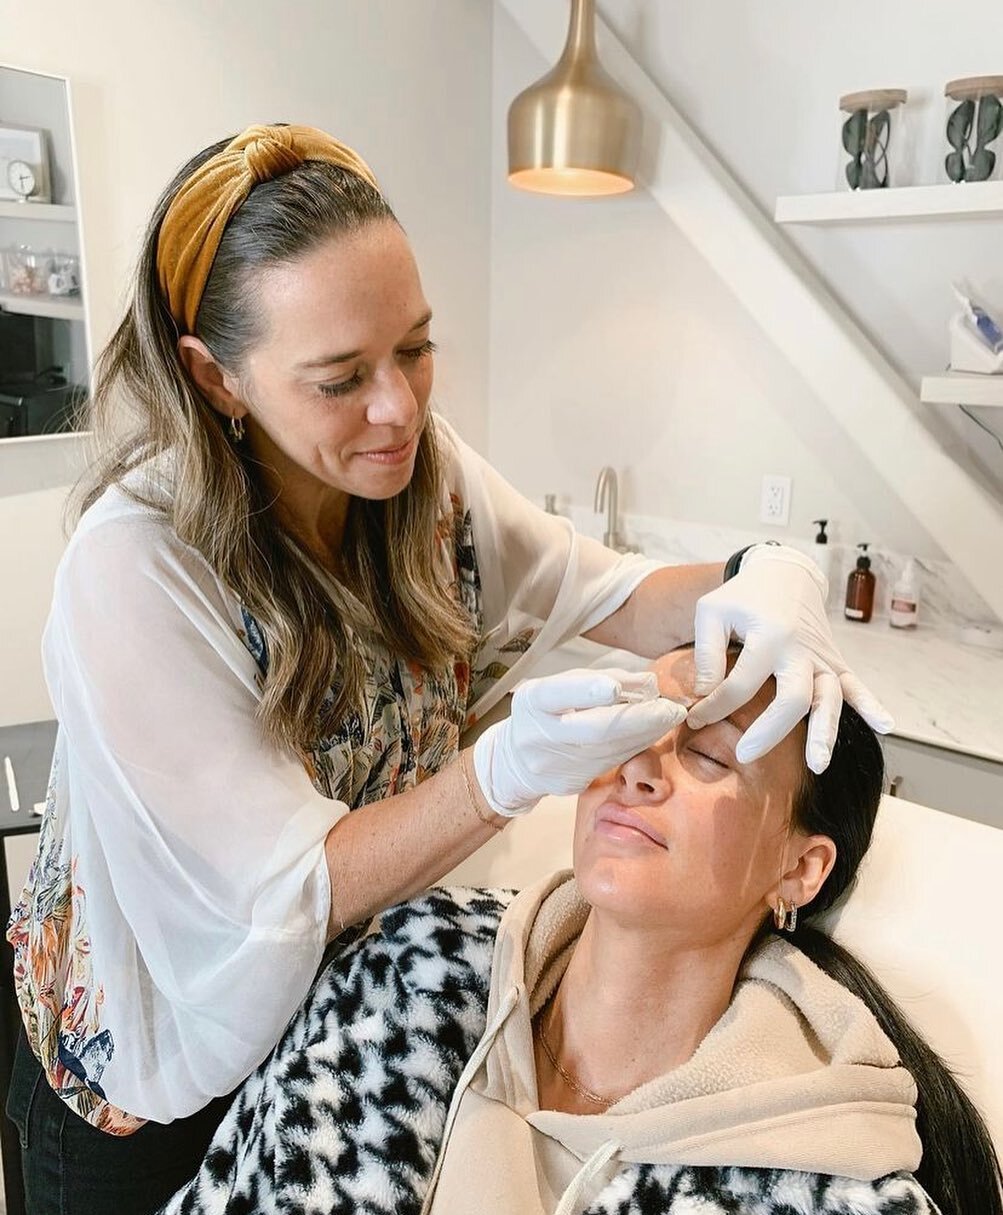 Botox at @sopramedspa &ldquo;isn&rsquo;t about changing who you are - but about enhancing what you&rsquo;ve got&rdquo;! Book an appointment with Dr. Lauren today! 💃 💉